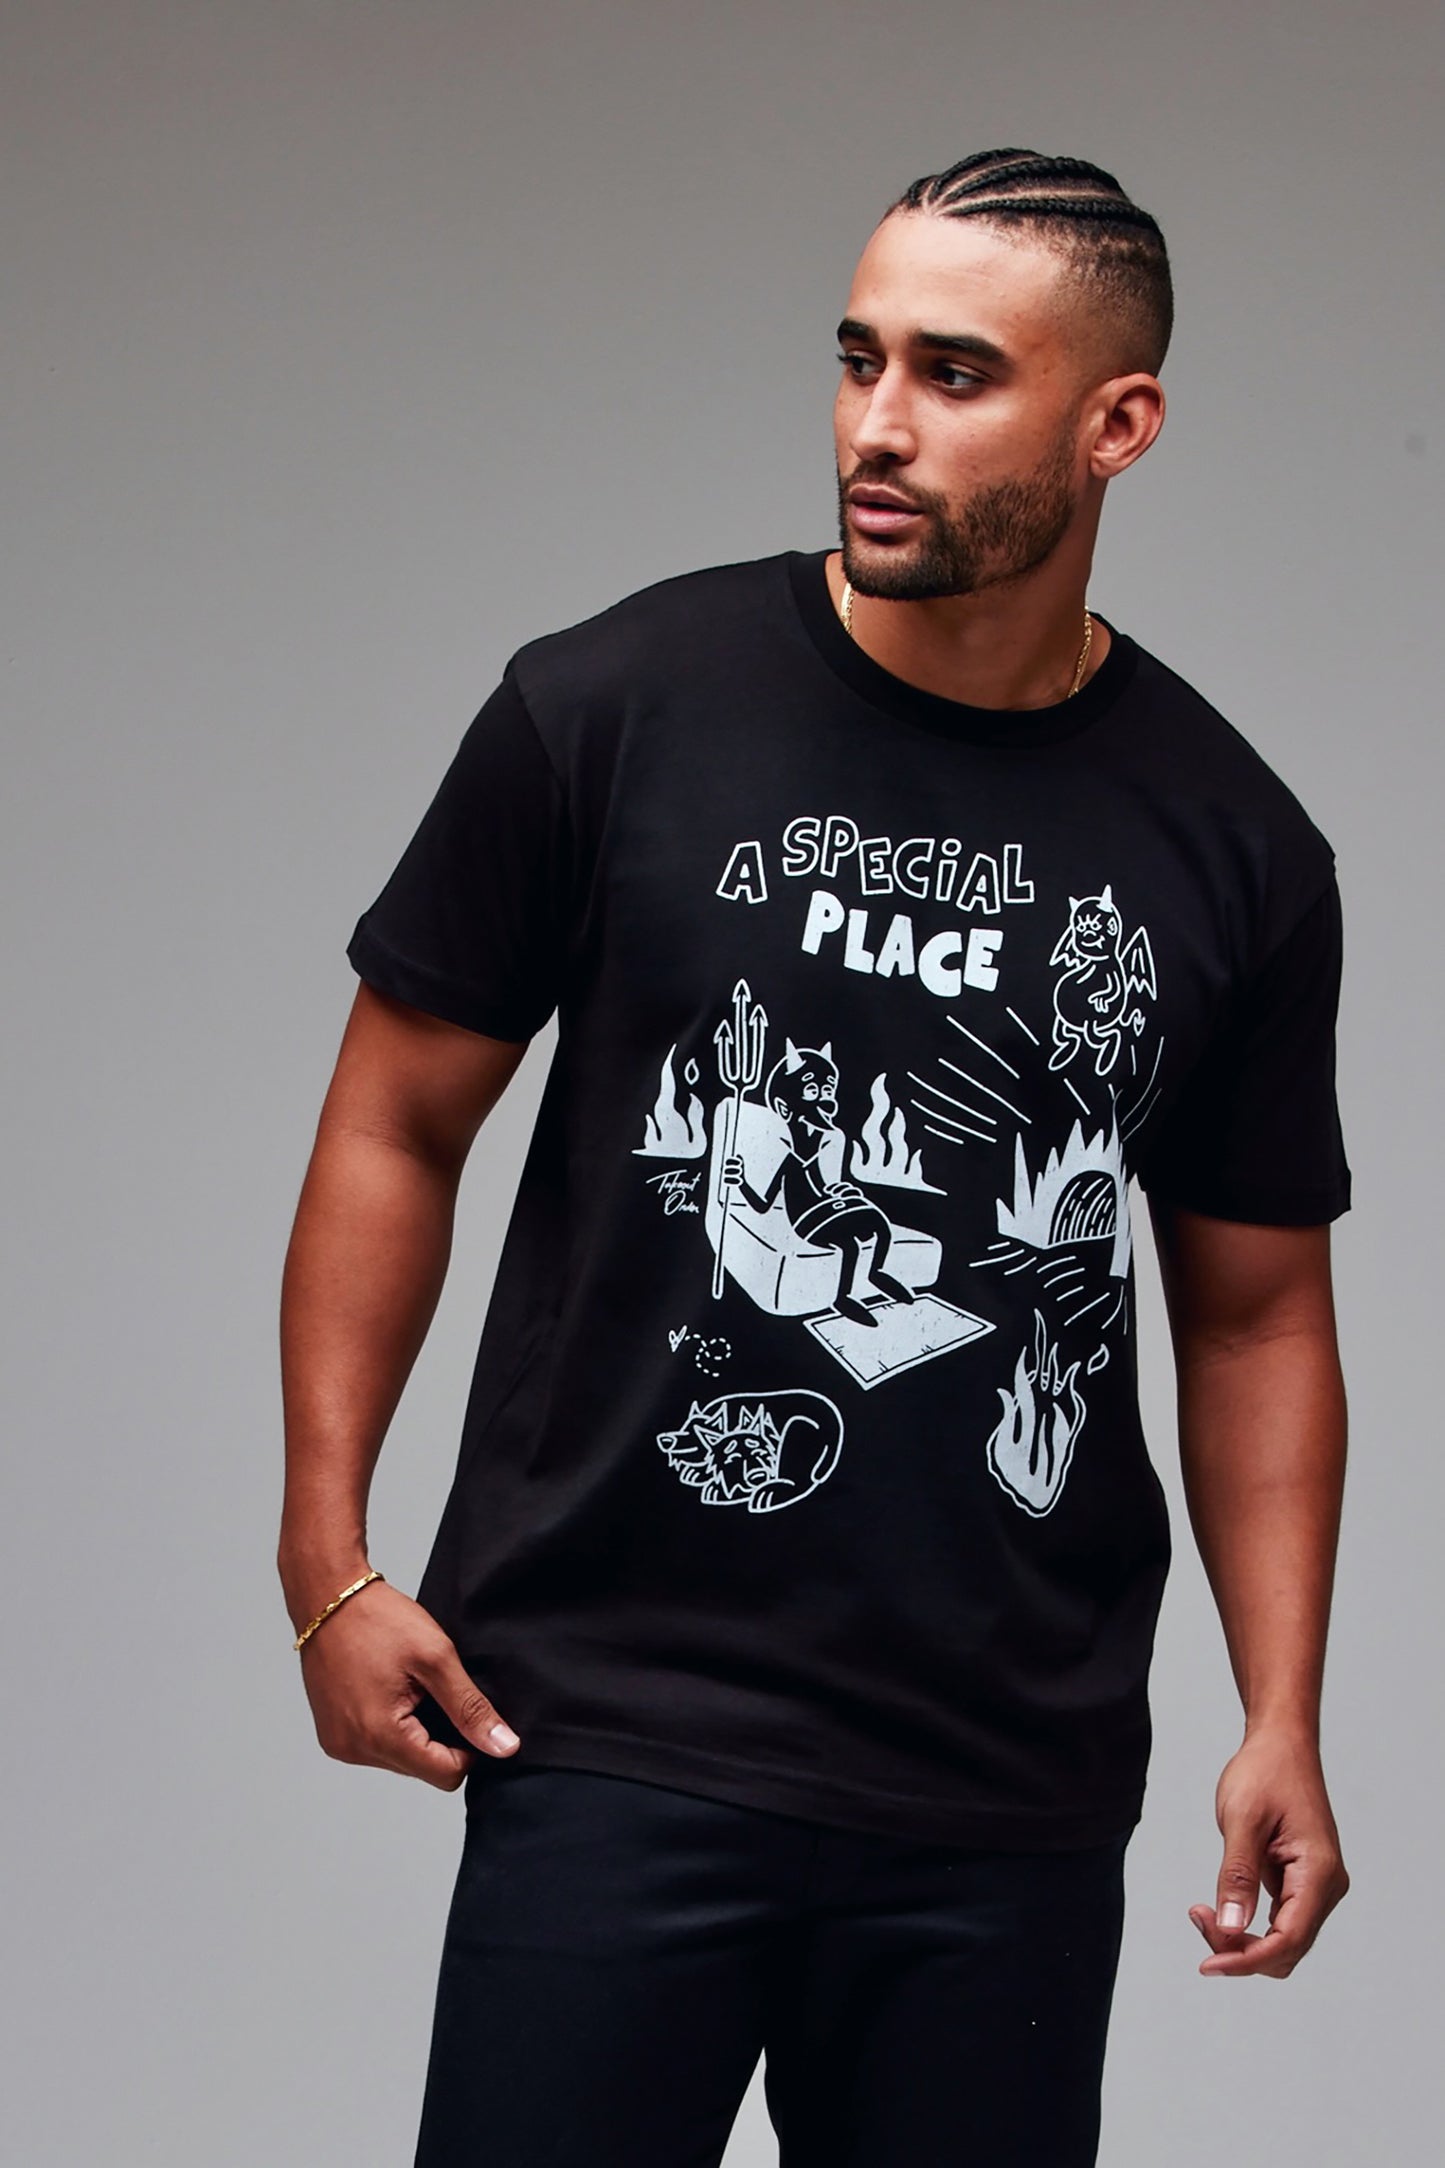 A Special Place T-shirt